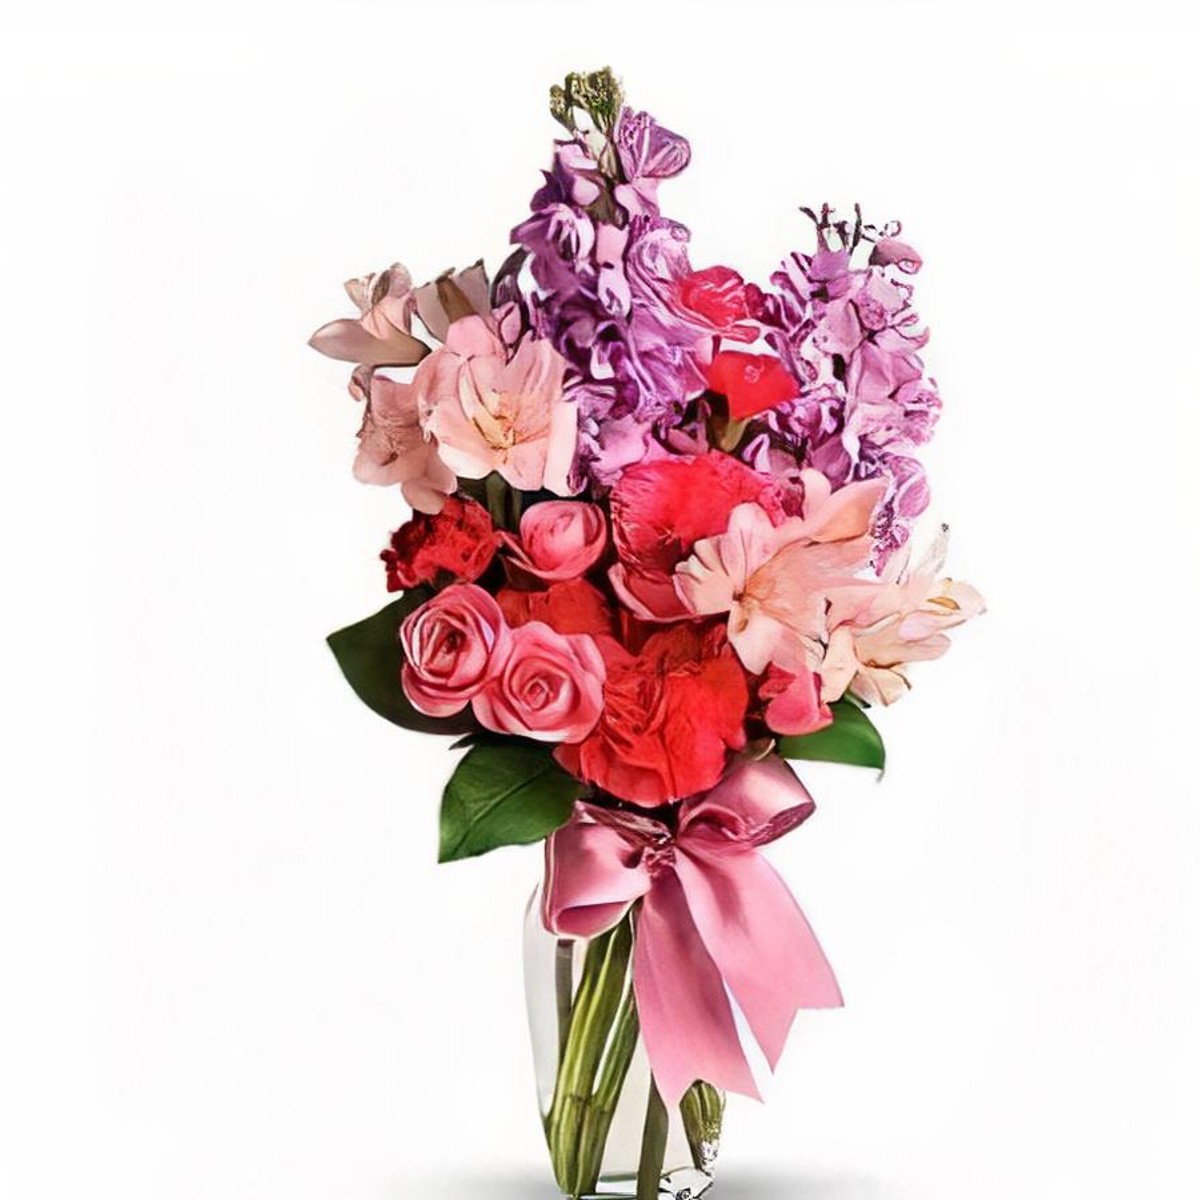 Florist Fort Worth TX - Flower Delivery Fort Worth Texas